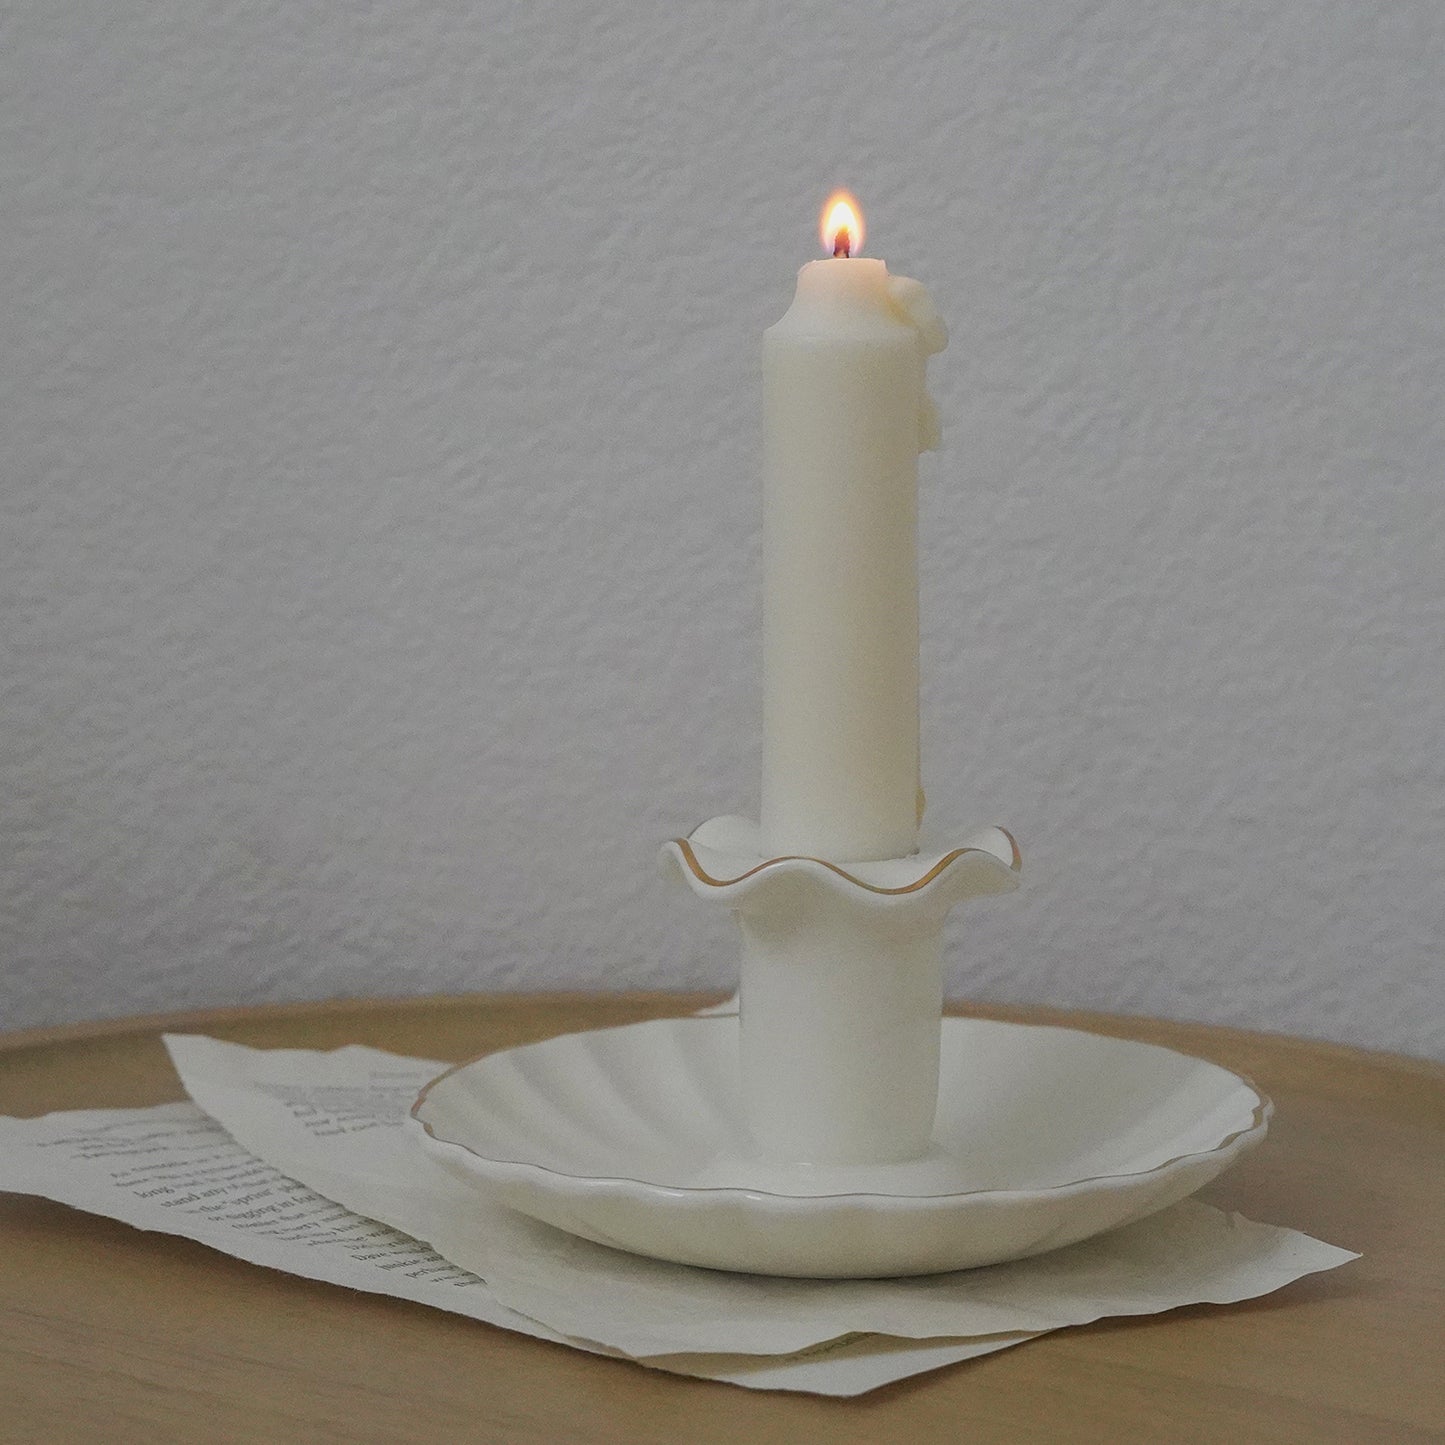 a lit white taper soy pillar candle in a white gold rim ruffle vintage candle holder on book pages